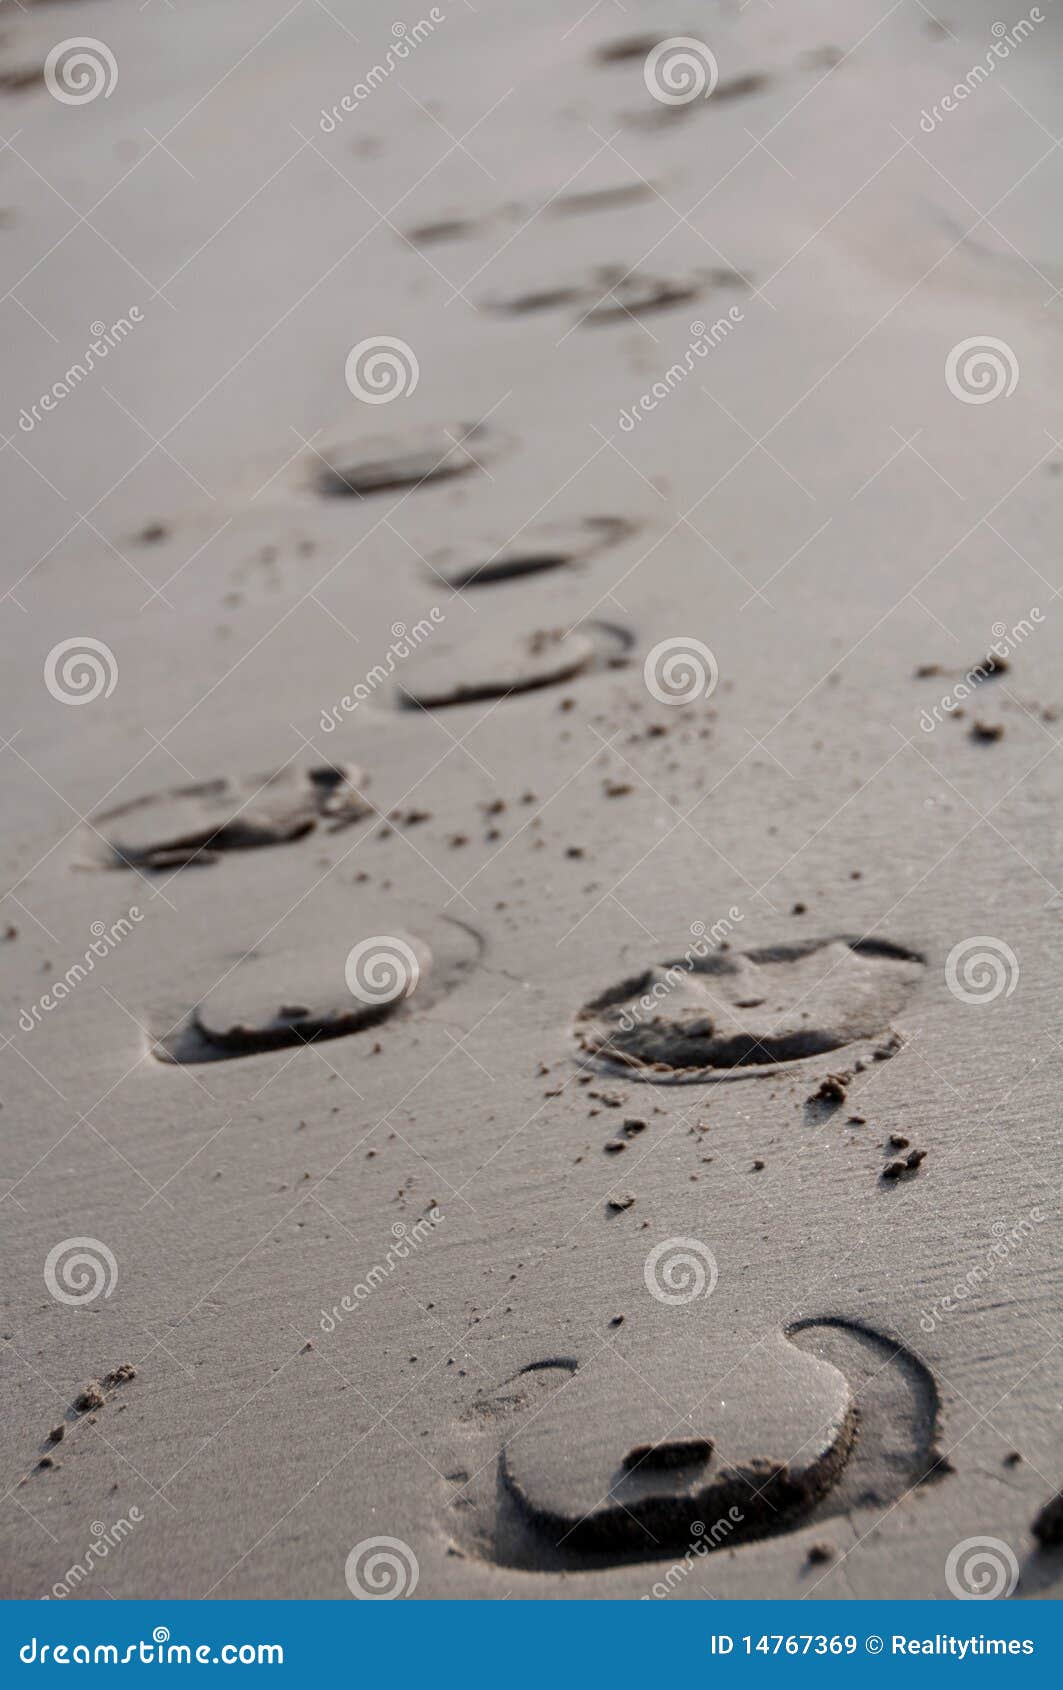 horse shoe prints in the sand